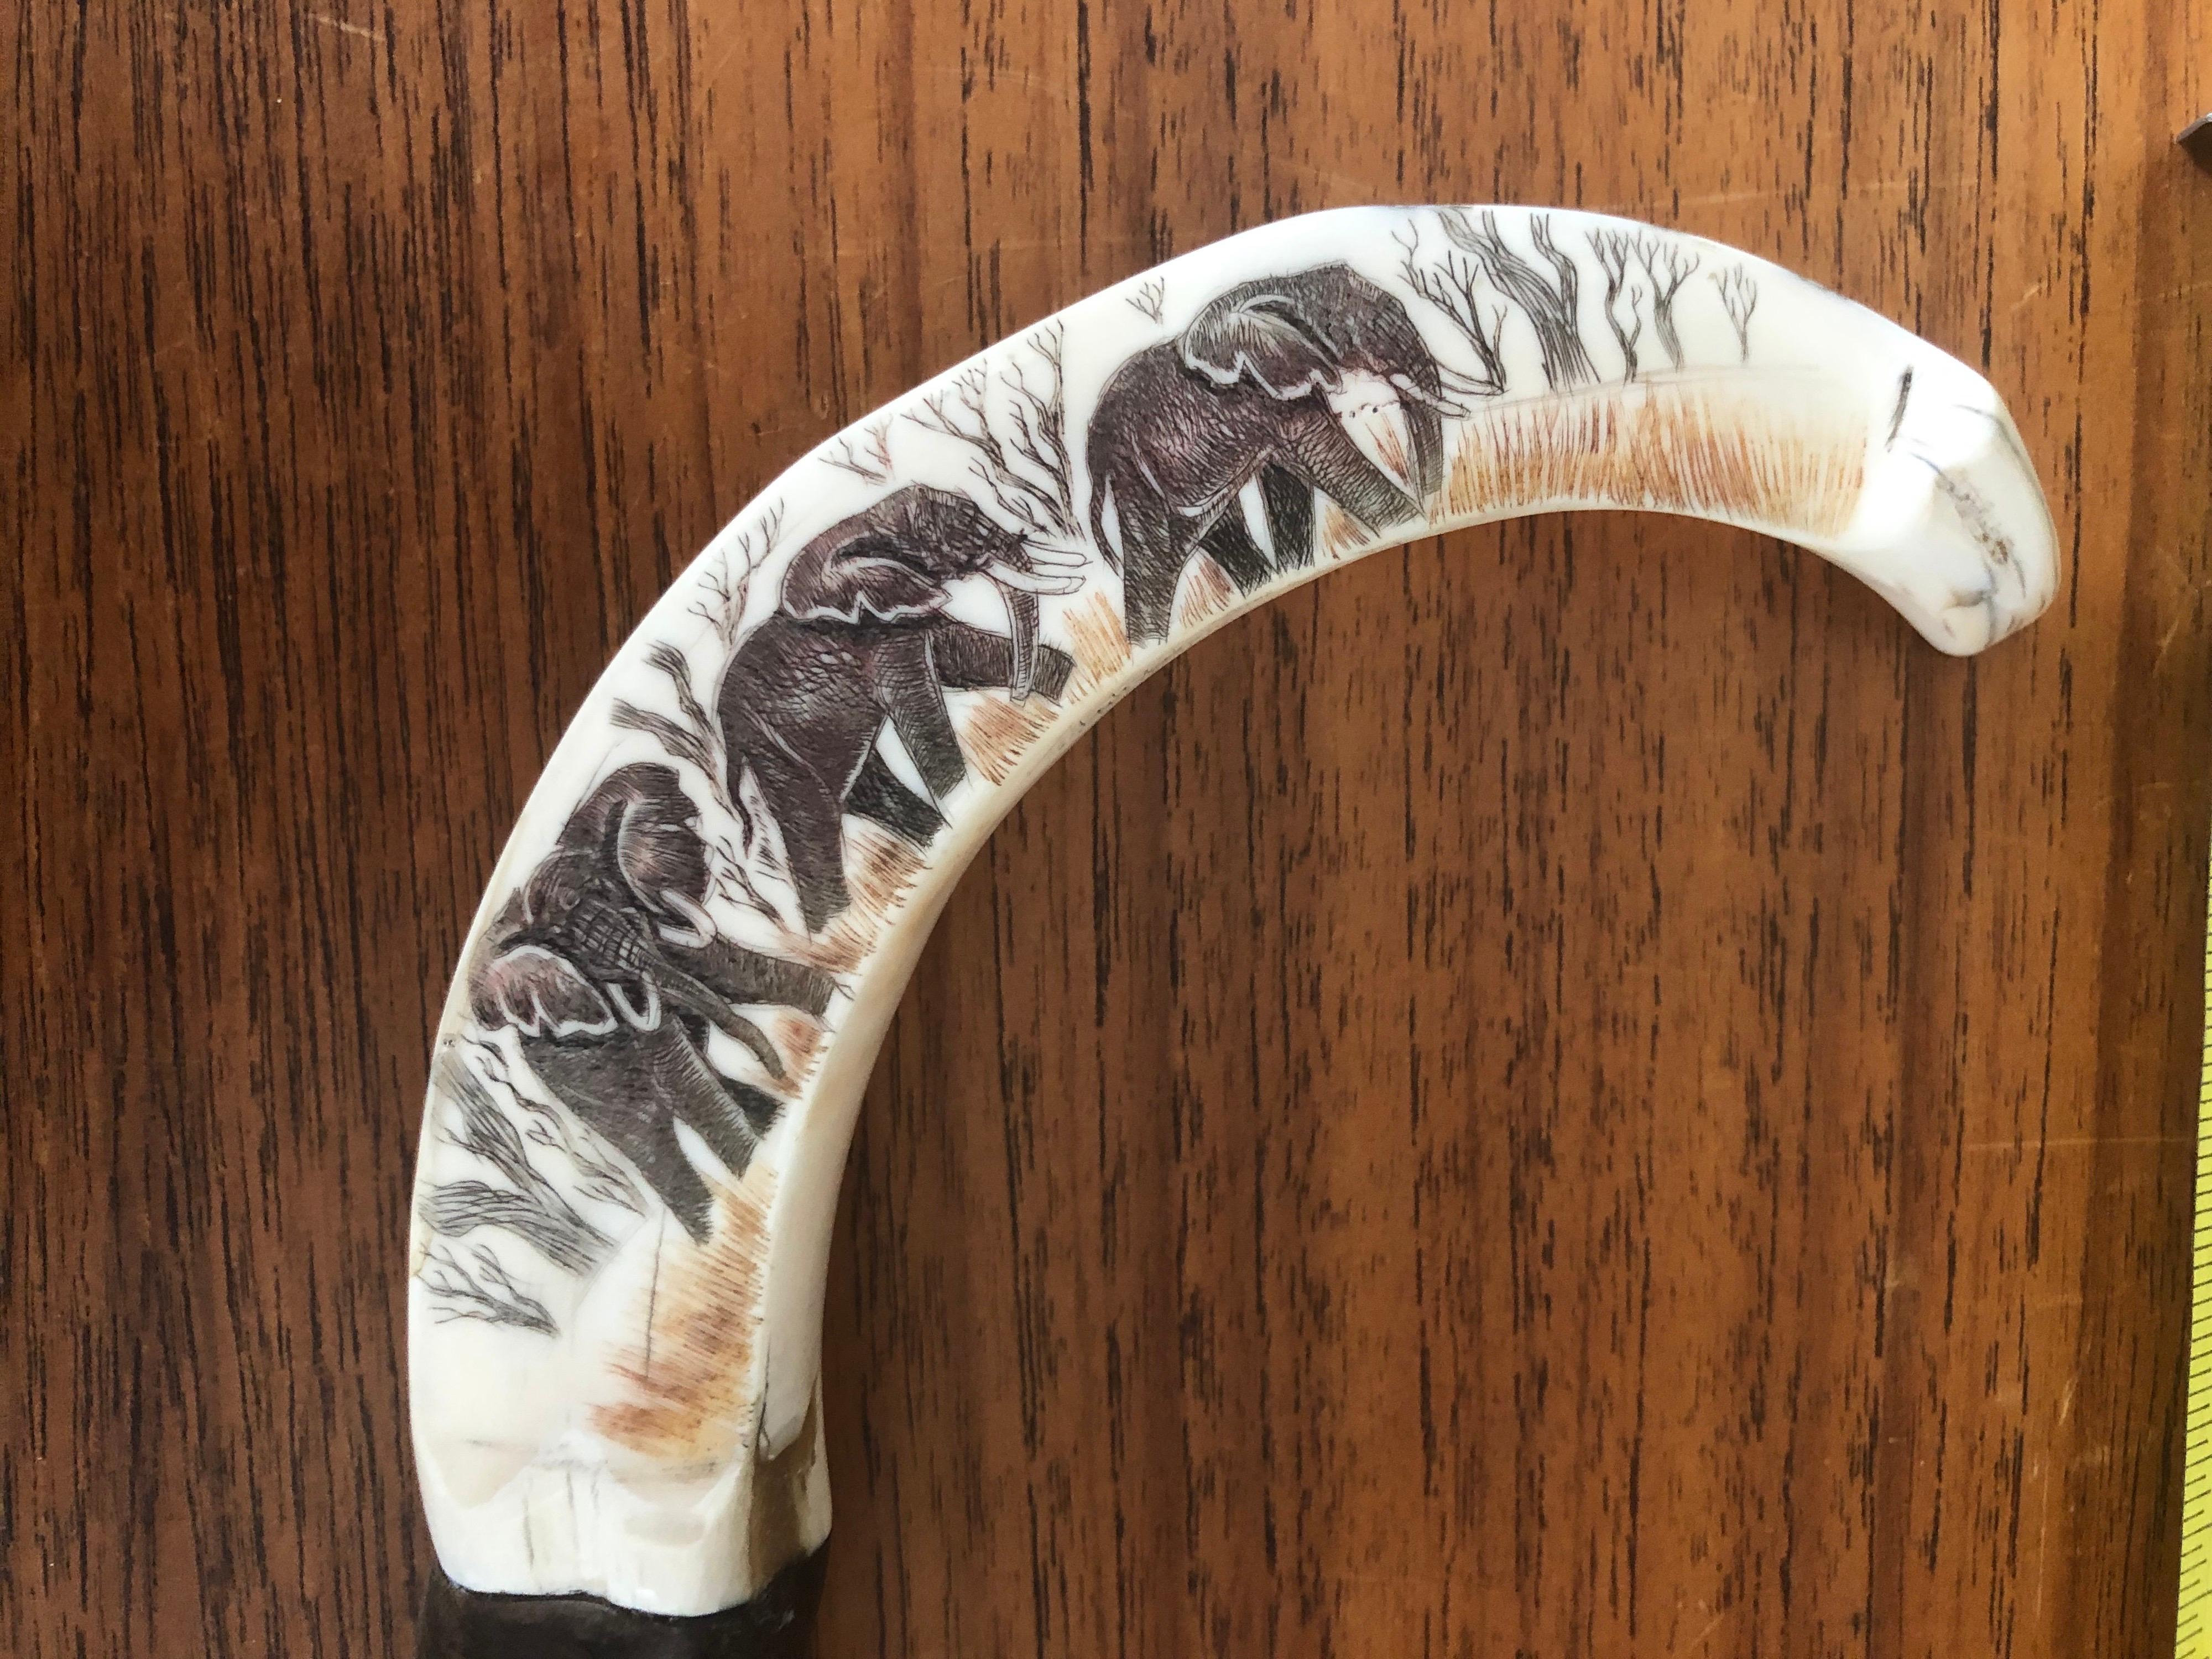 Fabulous antique walking stick with horn handle decorated with elephant scrimshaw, circa 1900. The handle is a curved horn with a pack of elephants in scrimshaw. Very well done. The total length of the stick is 36